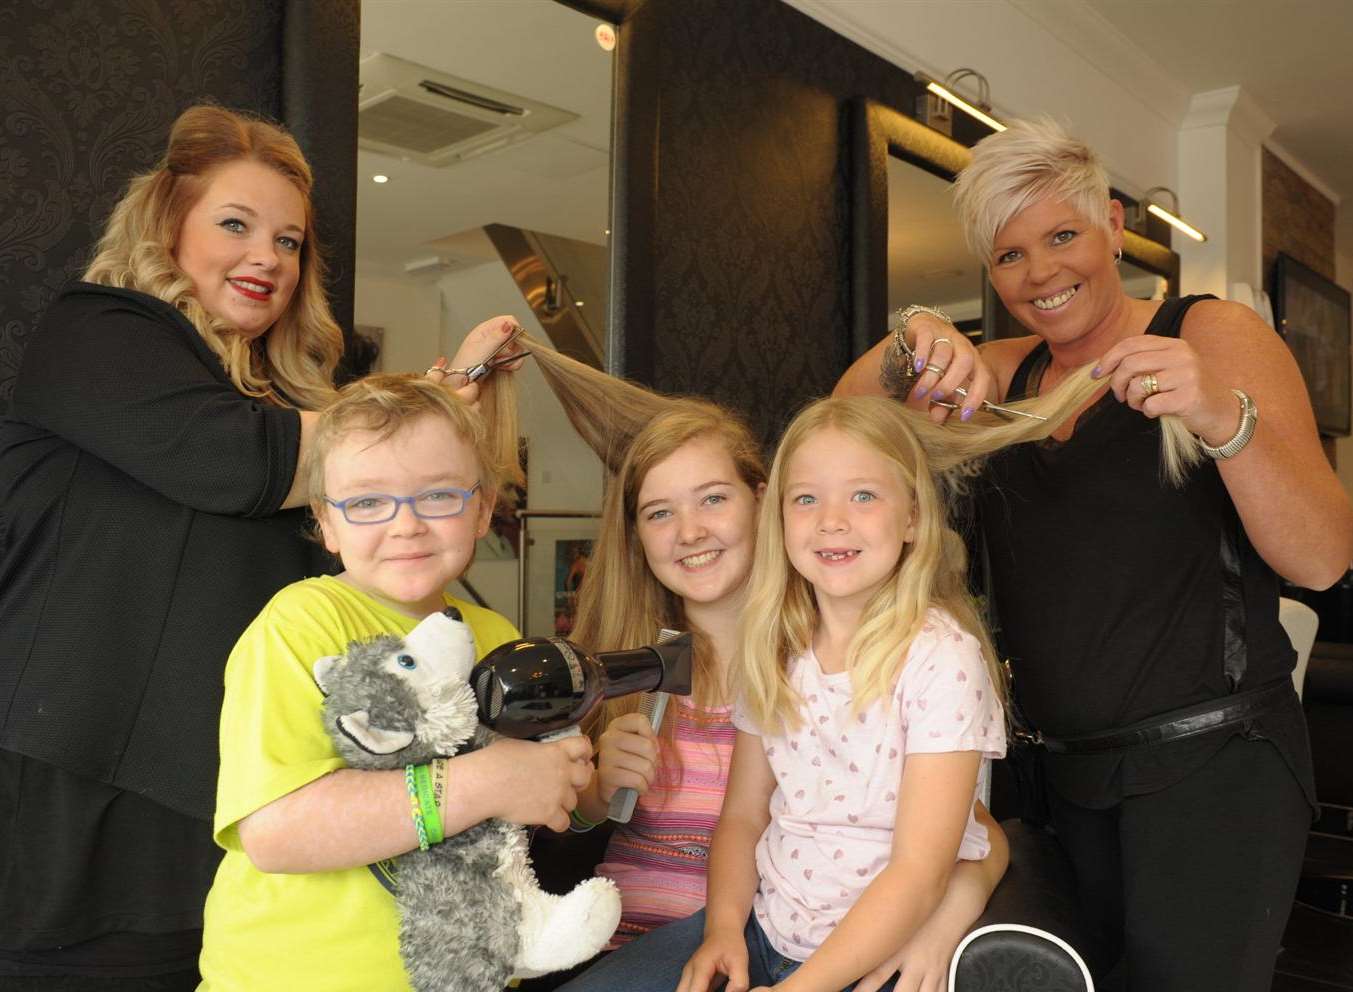 Hairdressers Rochelle Turner and Natasha Collier with Oakley, Maisie and Tilly Orange